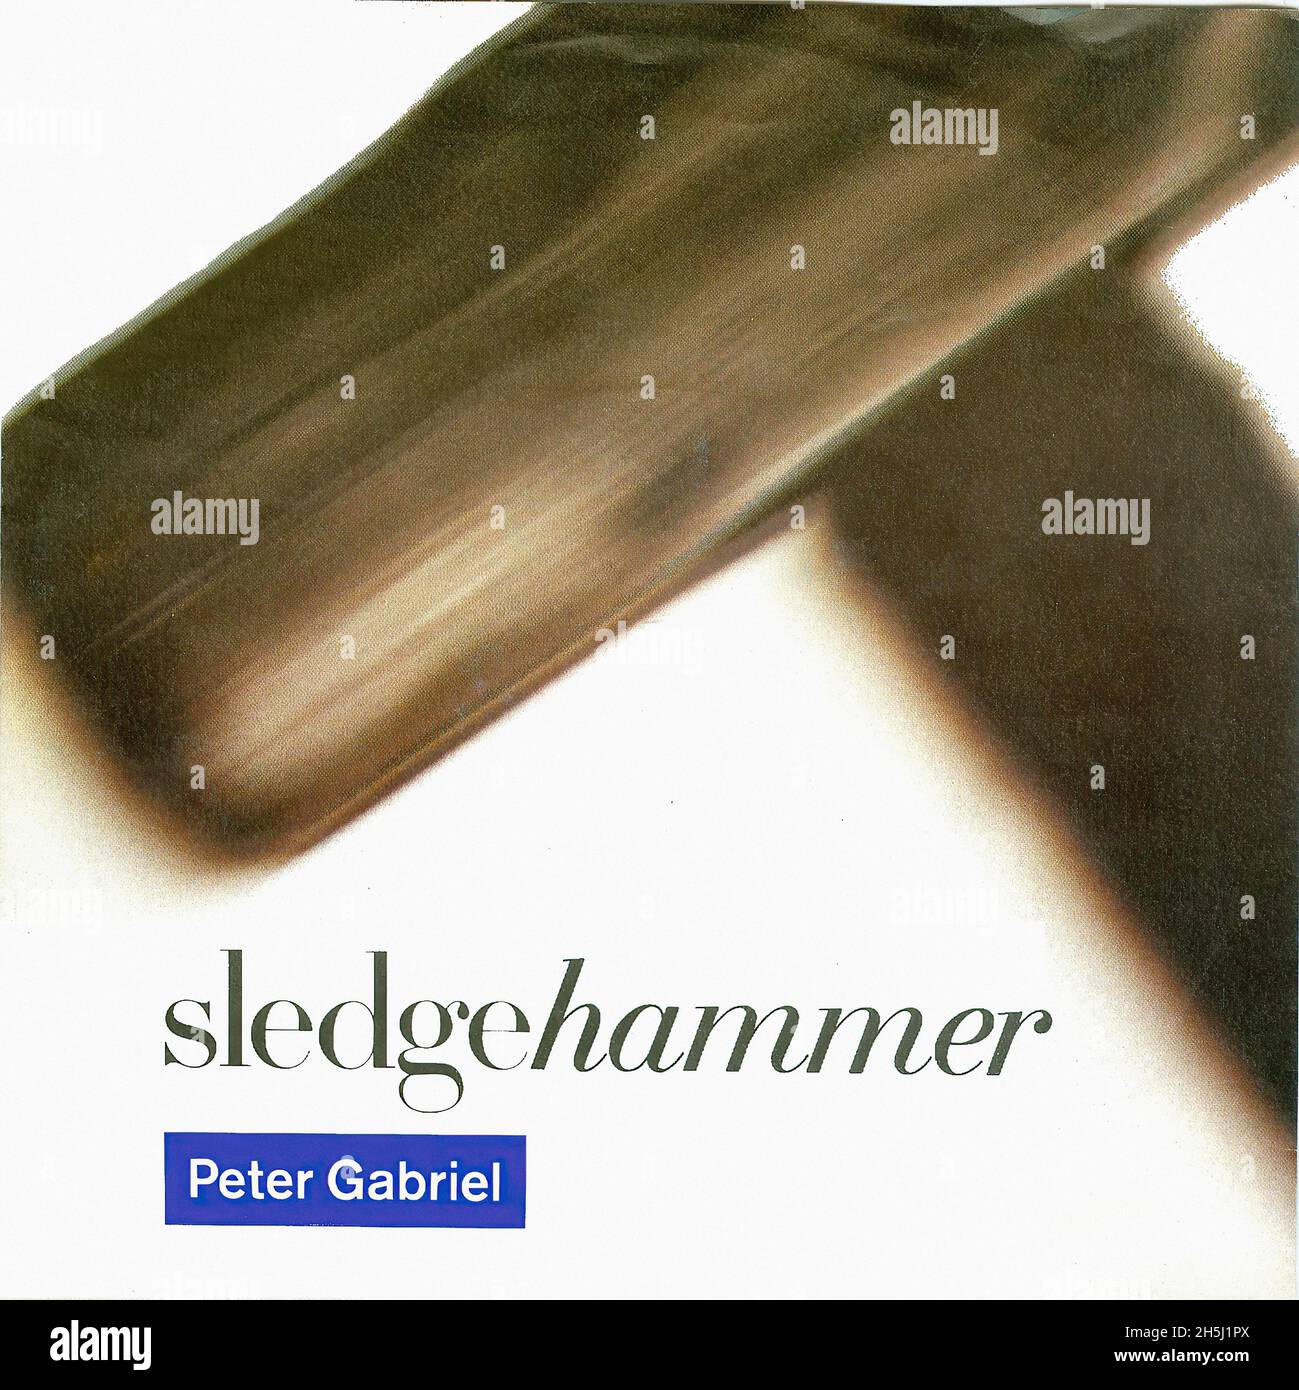 Vintage single record cover - Gabriel, Peter - Sledgehammer - D - 1986 Stock Photo